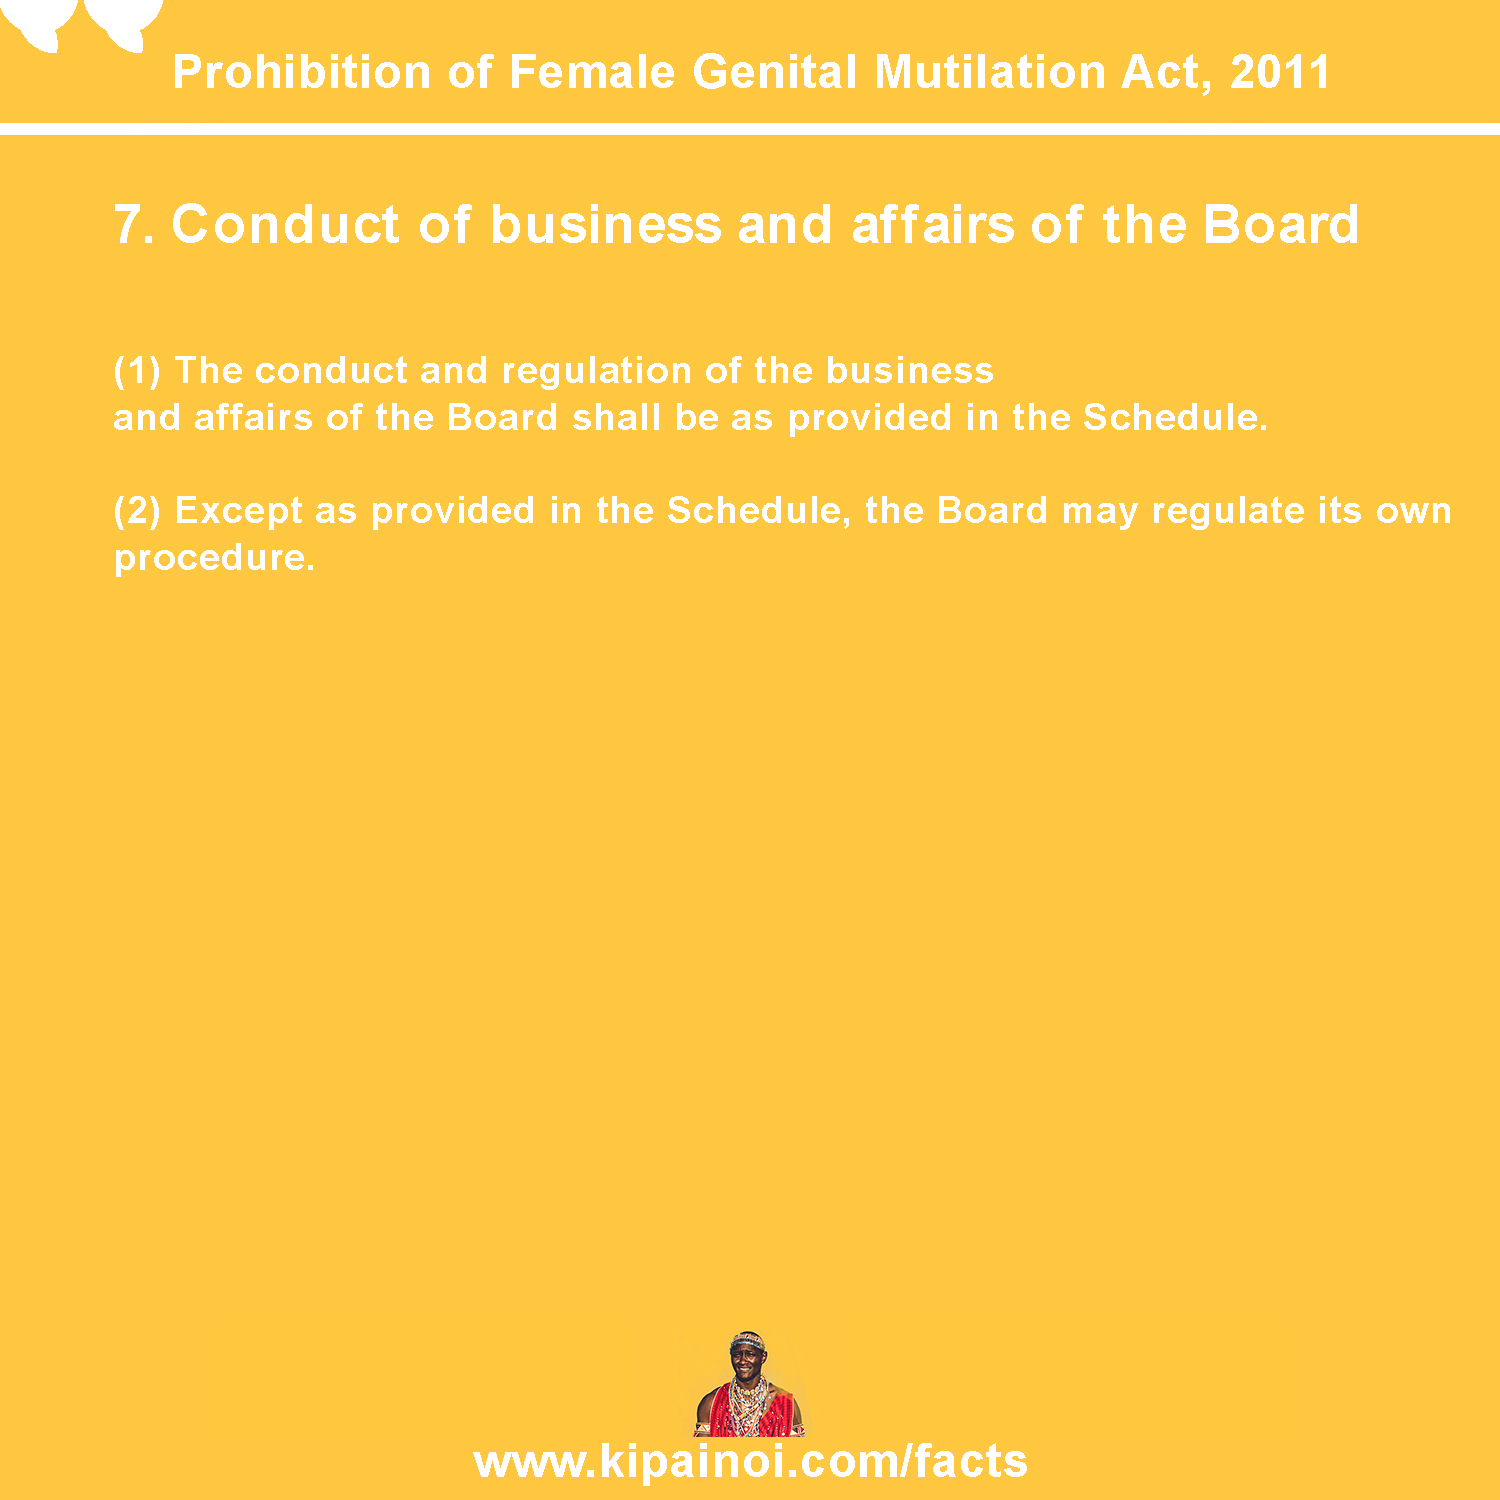 7. Conduct of business and affairs of the Board